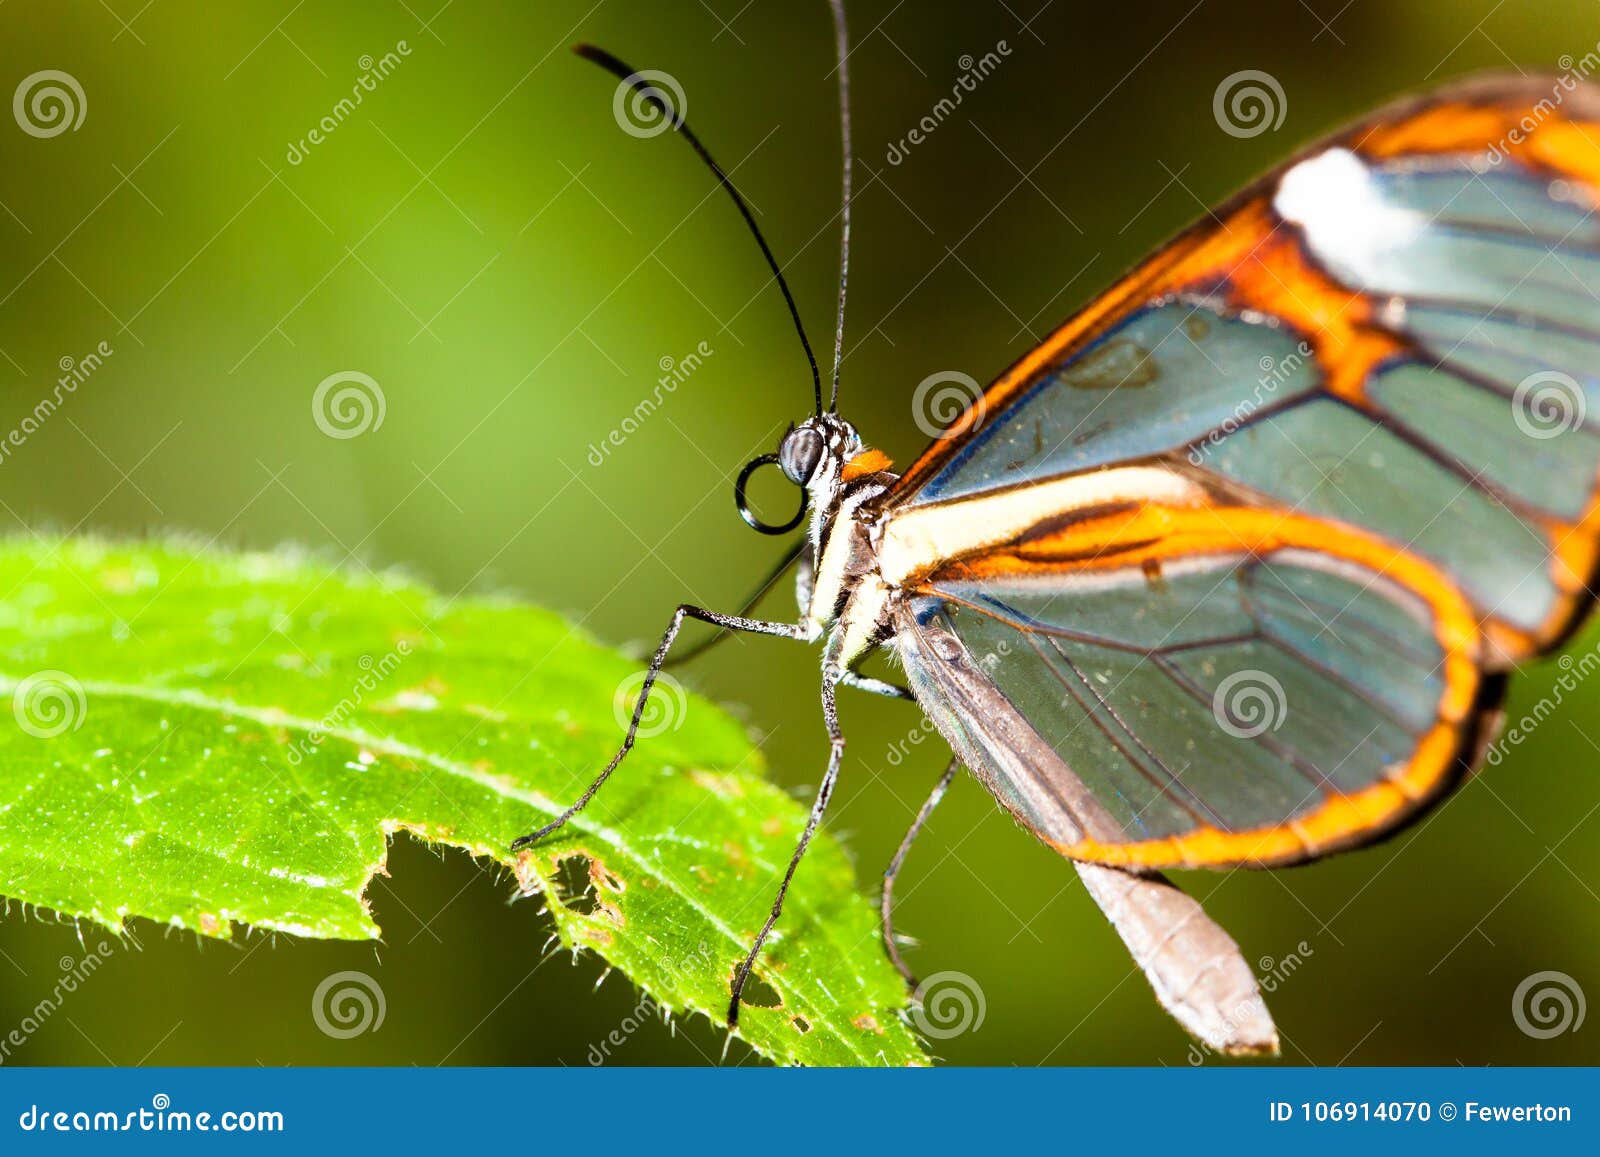 butterfly on flower. butterfly with transparent clearwing `glass` wings greta oto closeup macro photo.